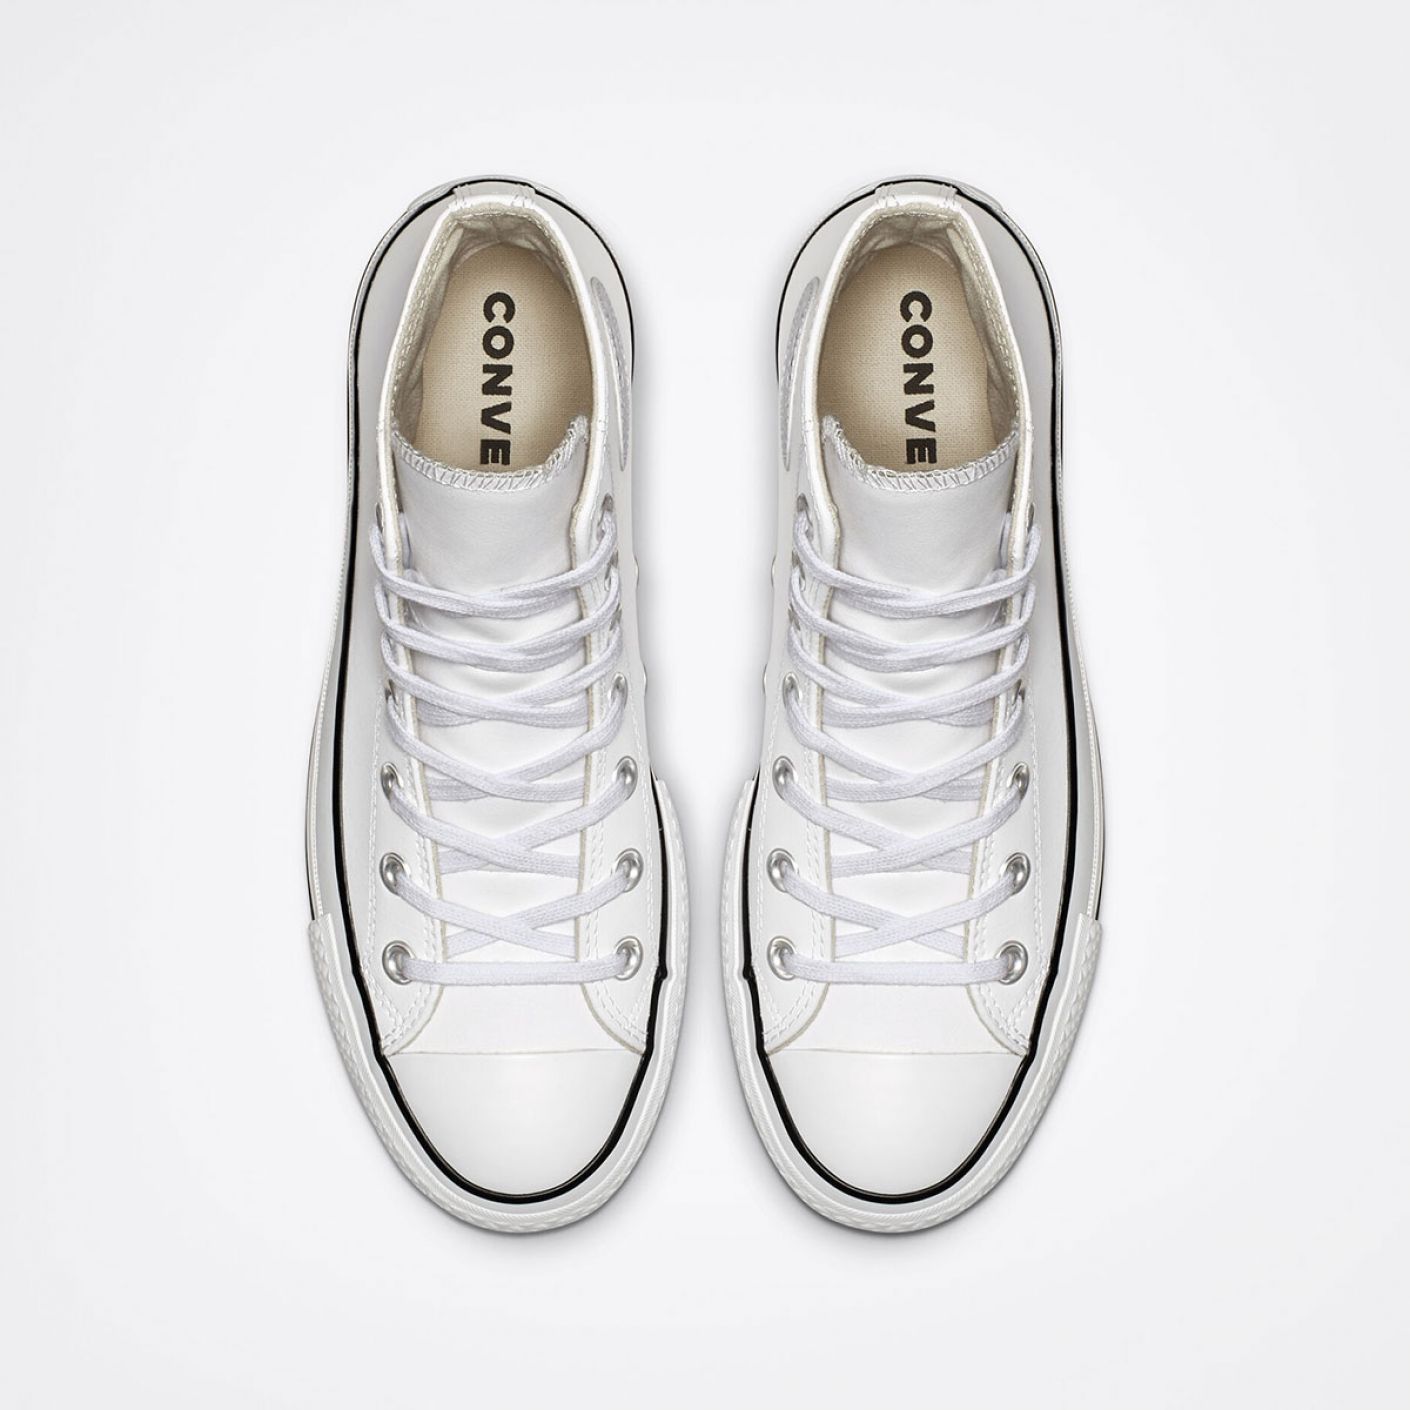 Converse Chuck Taylor All Star Lift in Pelle Bianca